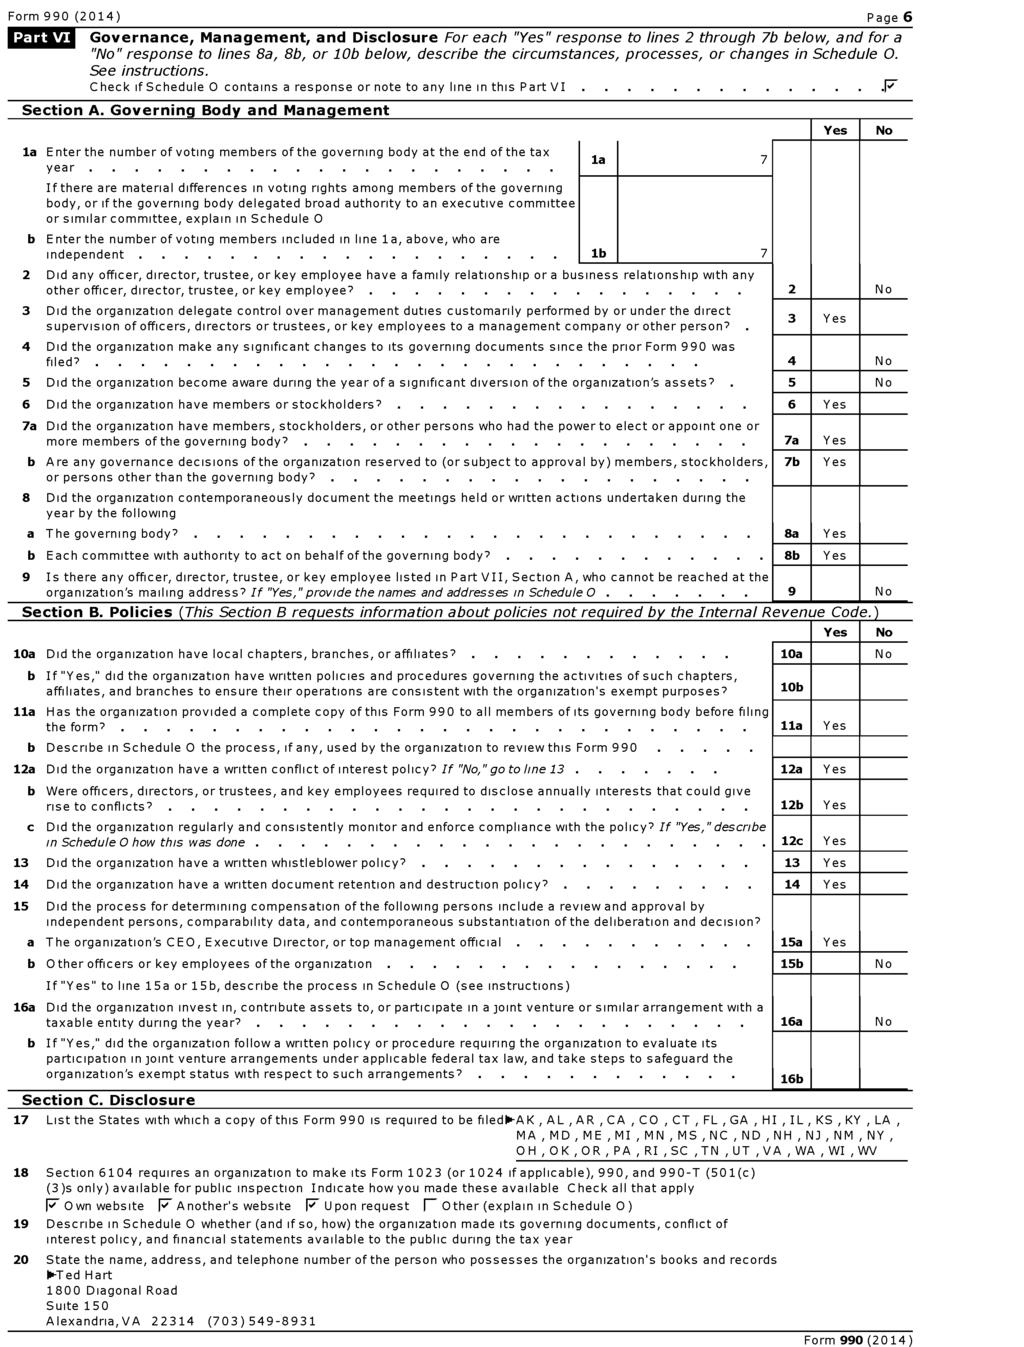 Form 990 ( 2014) Page 6 Lam Governance, Management, and Disclosure For each "Yes" response to lines 2 through 7b below, and for a "No" response to lines 8a, 8b, or 1Ob below, describe the